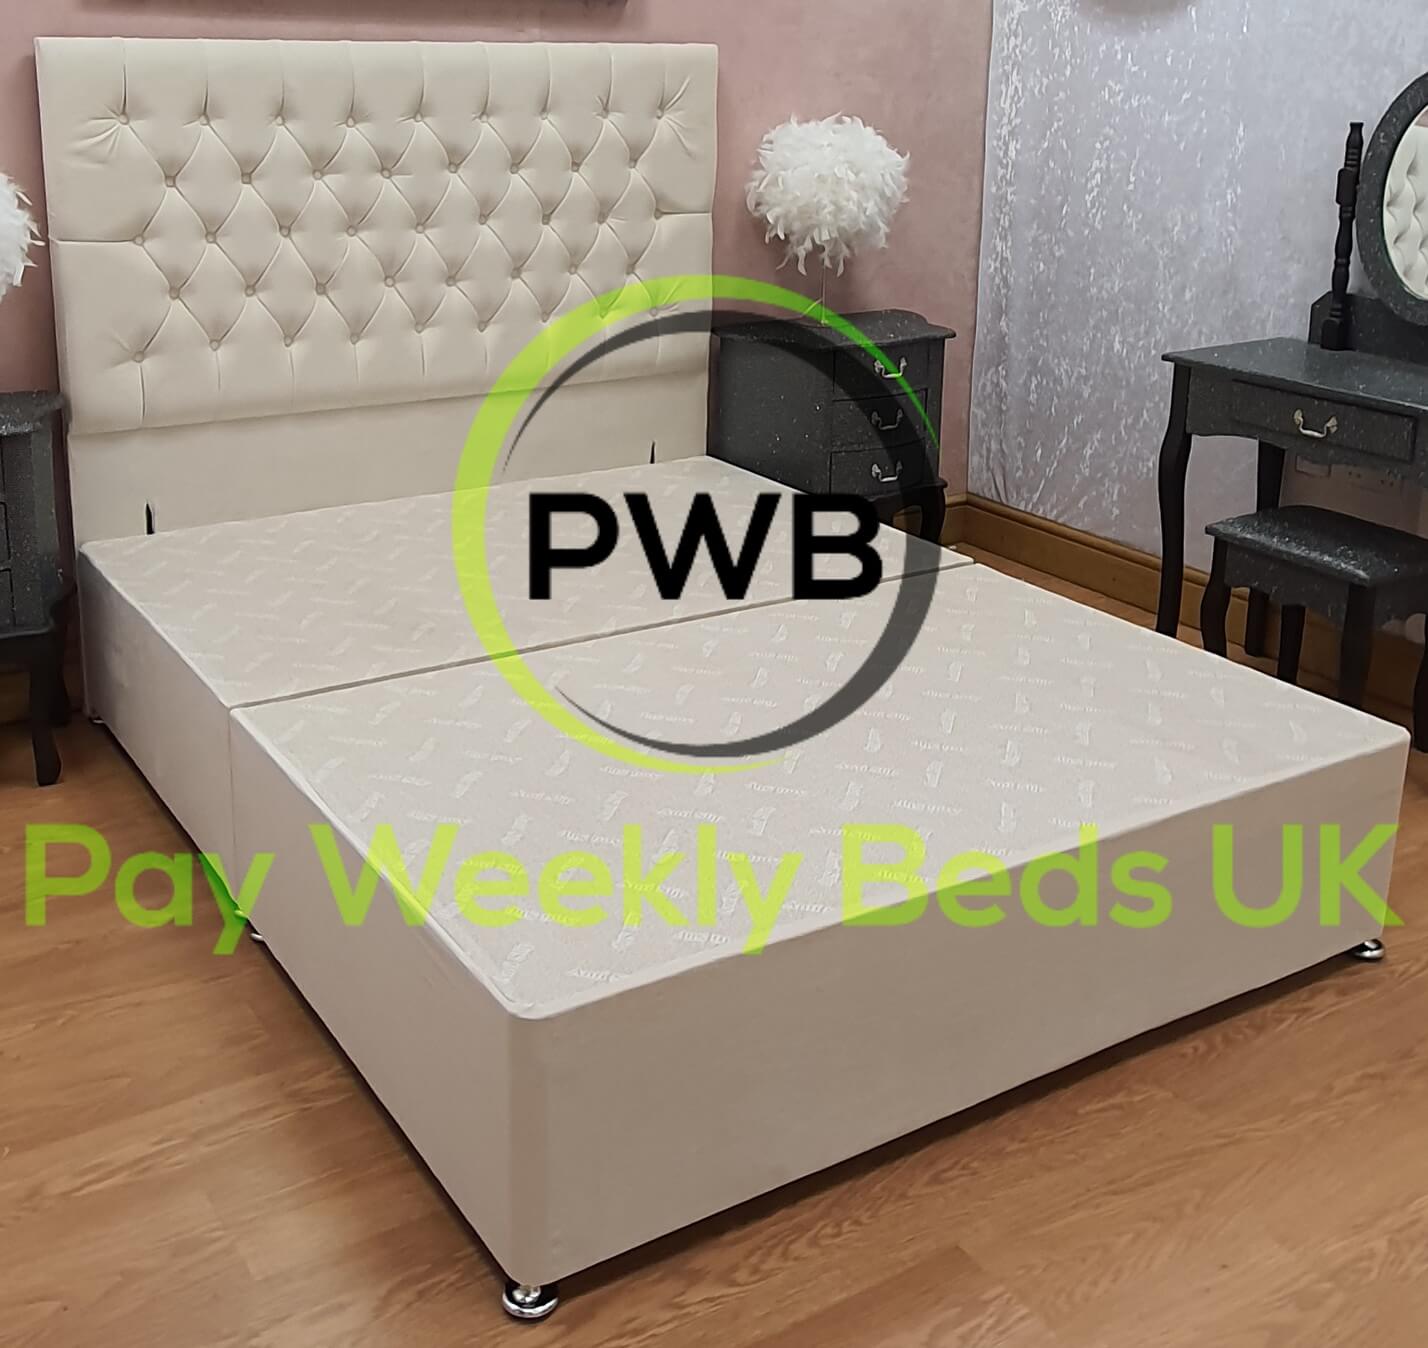 Divan Bed with Tall Headboard - Cream Velvet - Pay Weekly Beds UK